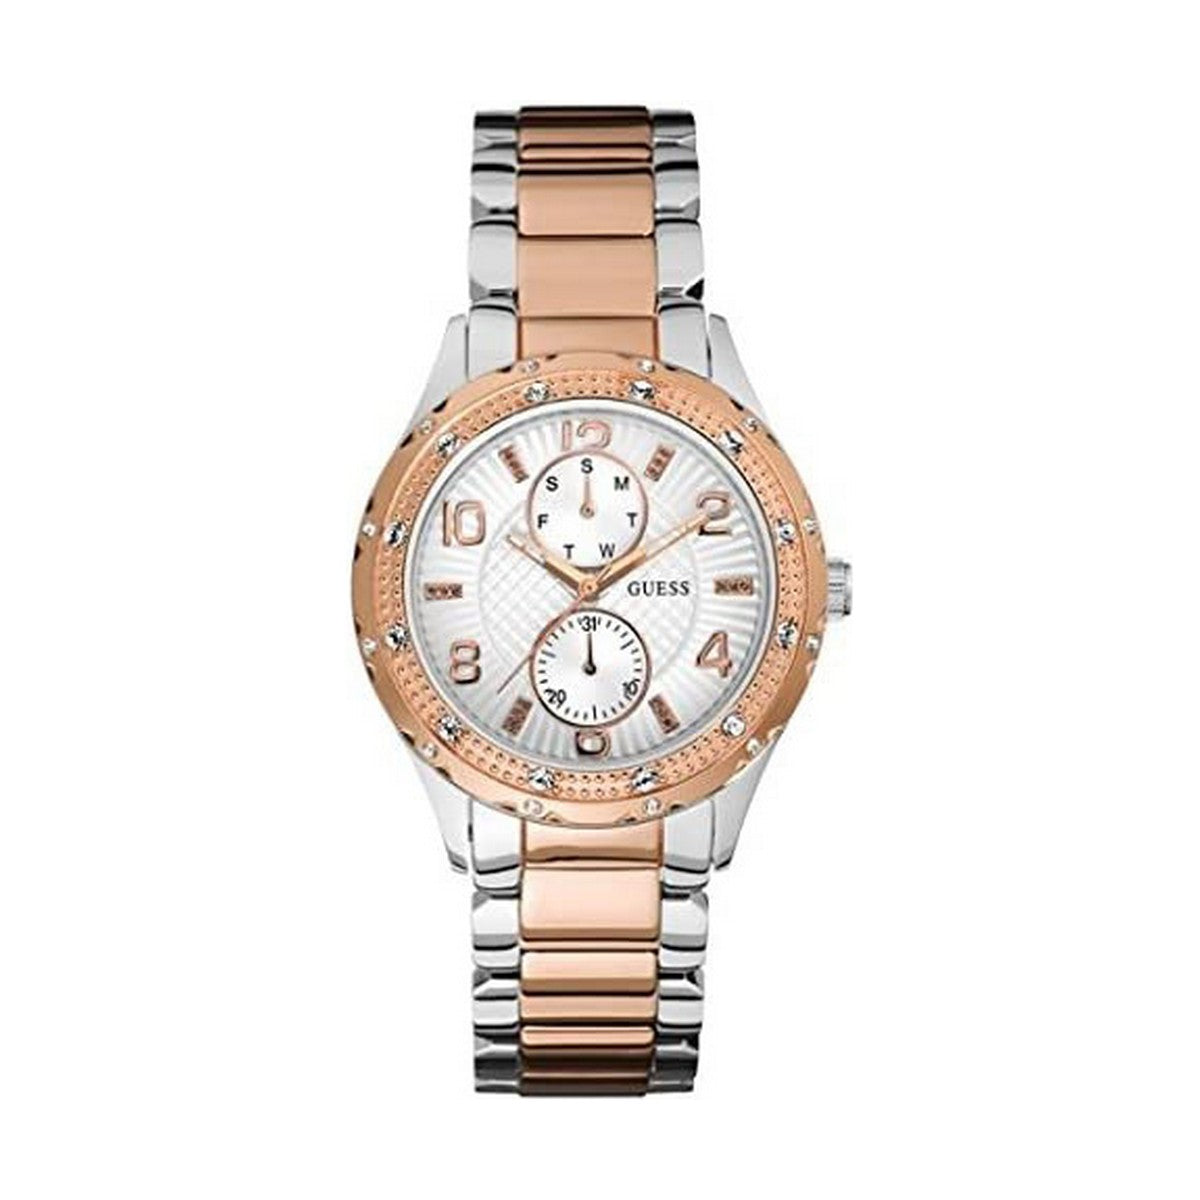 Ladies' Watch Guess W0442L4 (Ø 39 mm), Guess, Watches, Women, ladies-watch-guess-w0442l4-o-39-mm, Brand_Guess, category-reference-2570, category-reference-2635, category-reference-2995, category-reference-t-19667, category-reference-t-19725, Condition_NEW, fashion, original gifts, Price_100 - 200, RiotNook